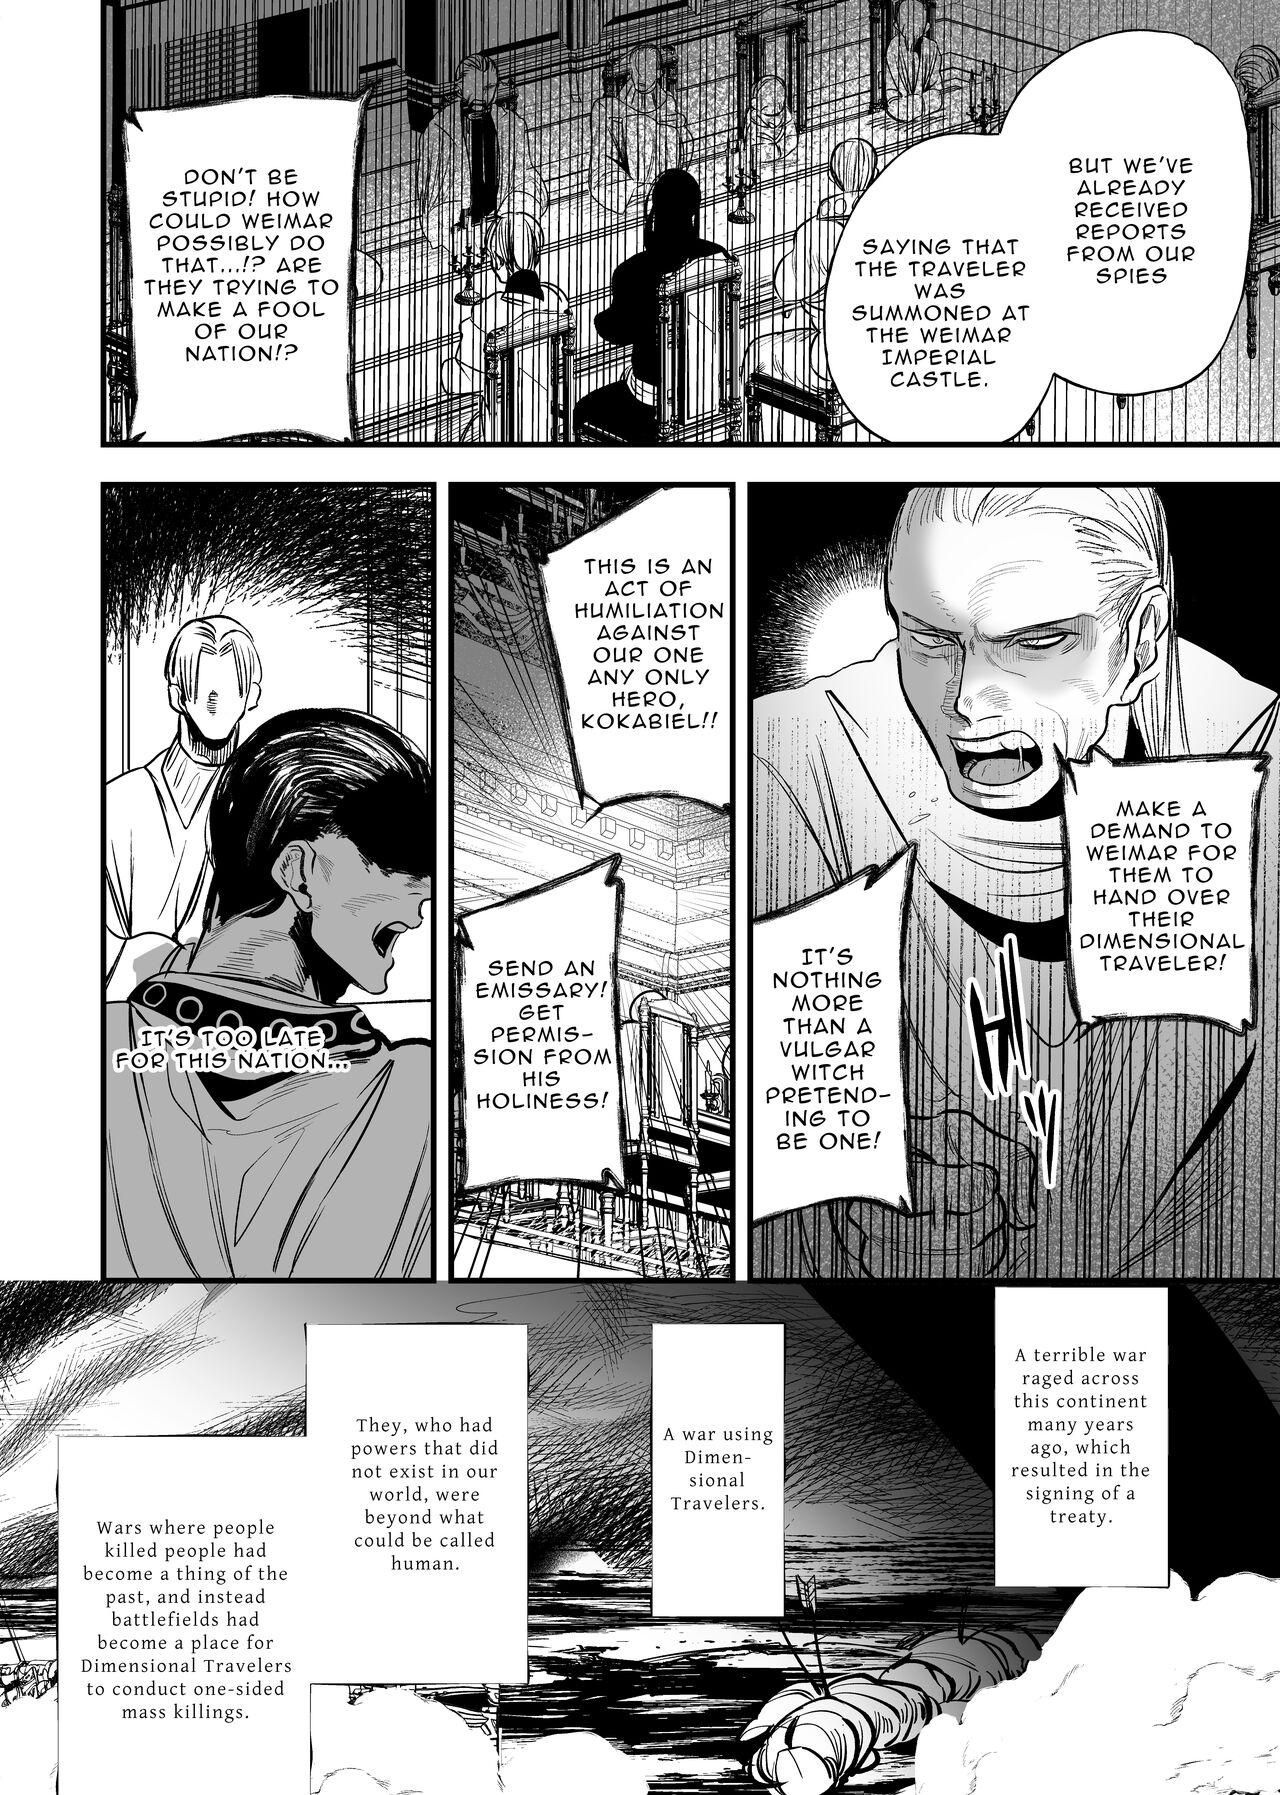 Sex Tape The Man Who Saved Me on my Isekai Trip was a Killer... 2 - Original Pinay - Page 6